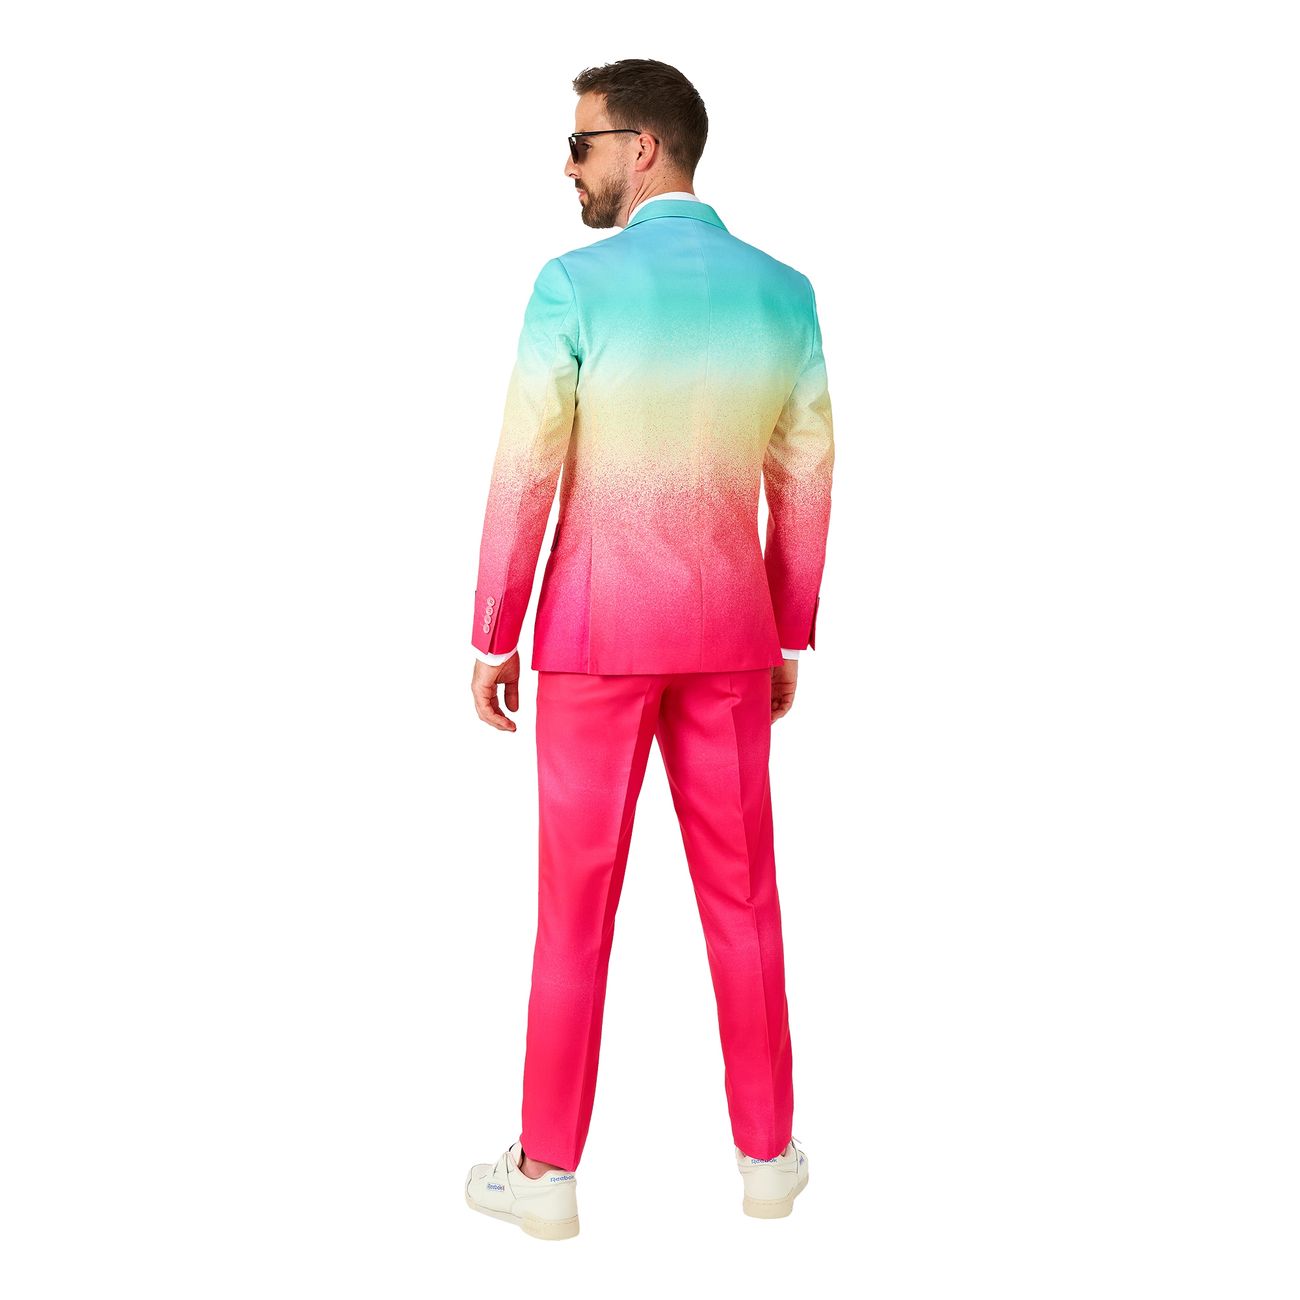 opposuits-funky-fade-kostym-100044-5